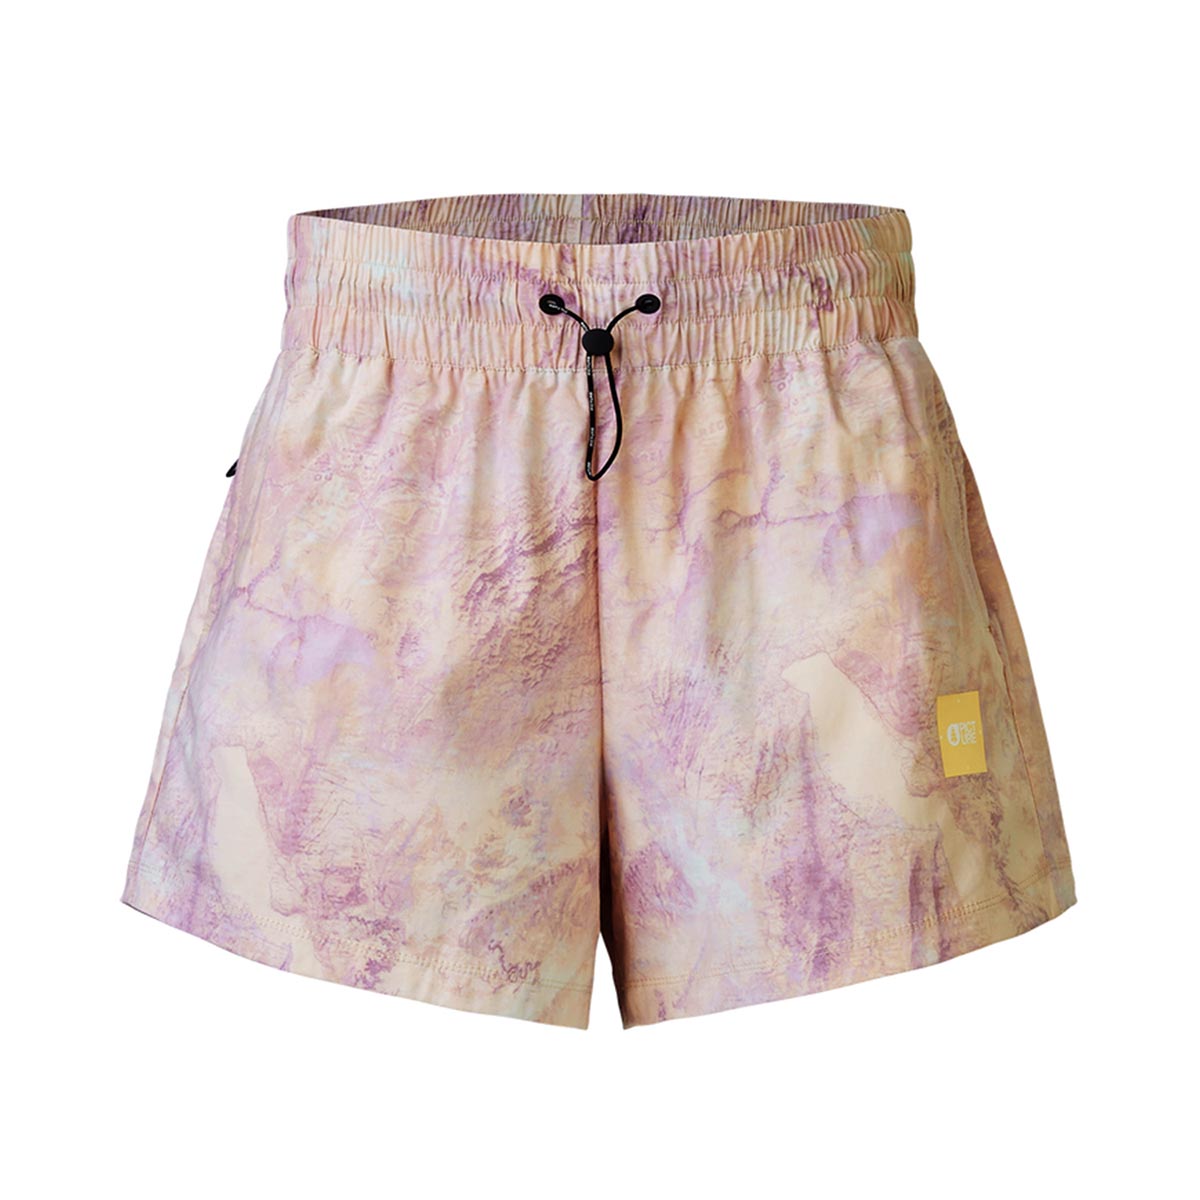 PICTURE - OSLON PRINTED TECH SHORTS